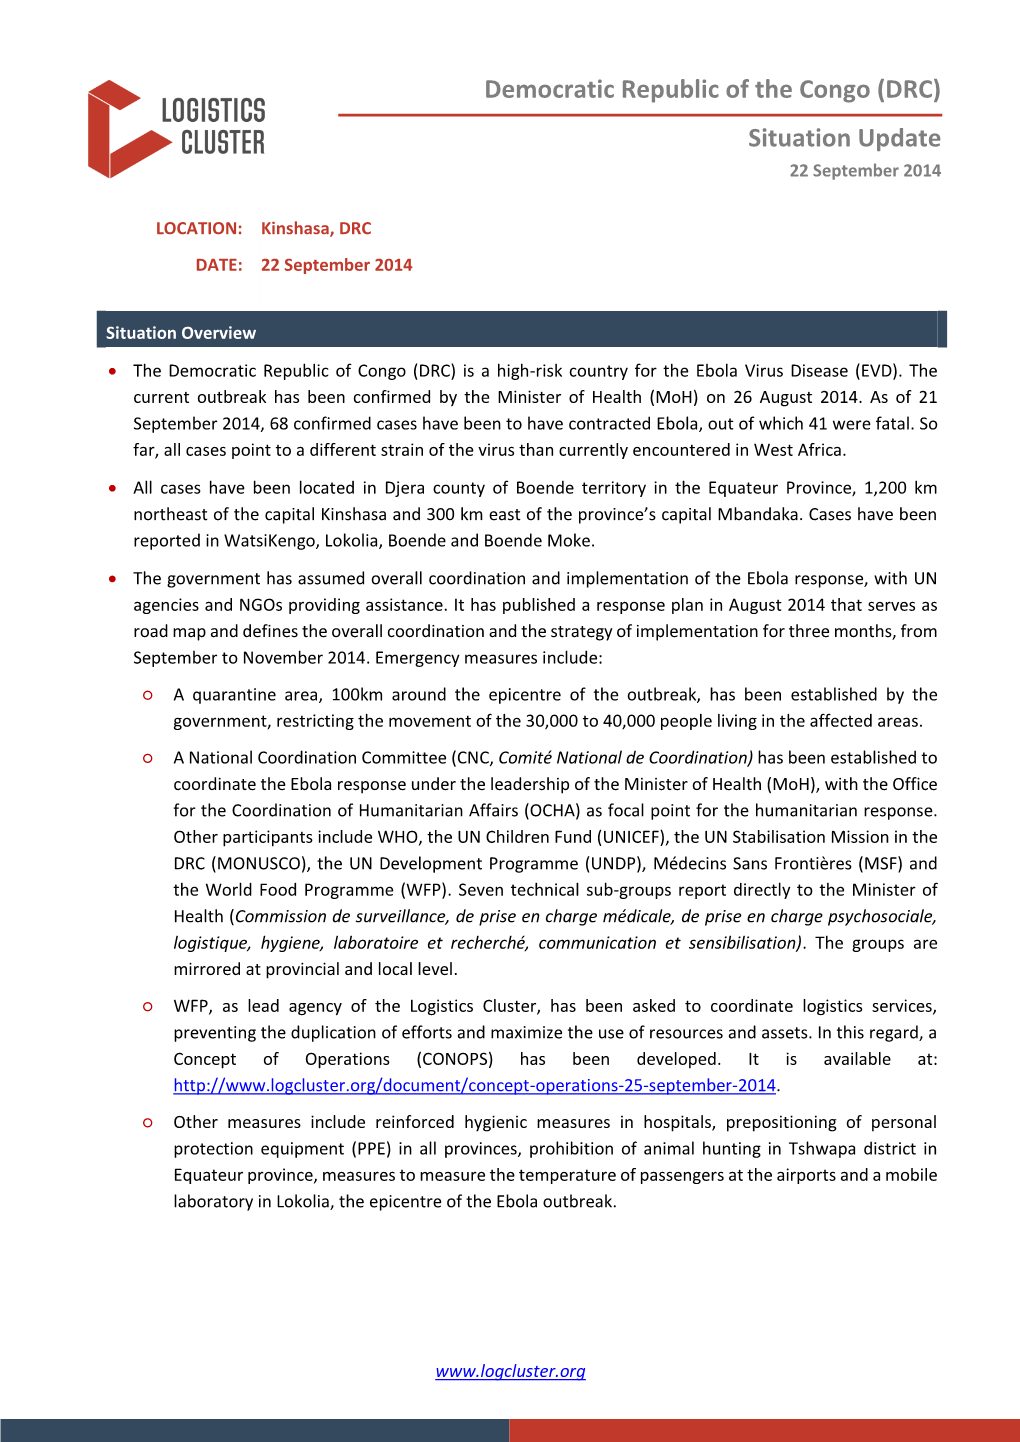 Democratic Republic of the Congo (DRC) Situation Update 22 September 2014